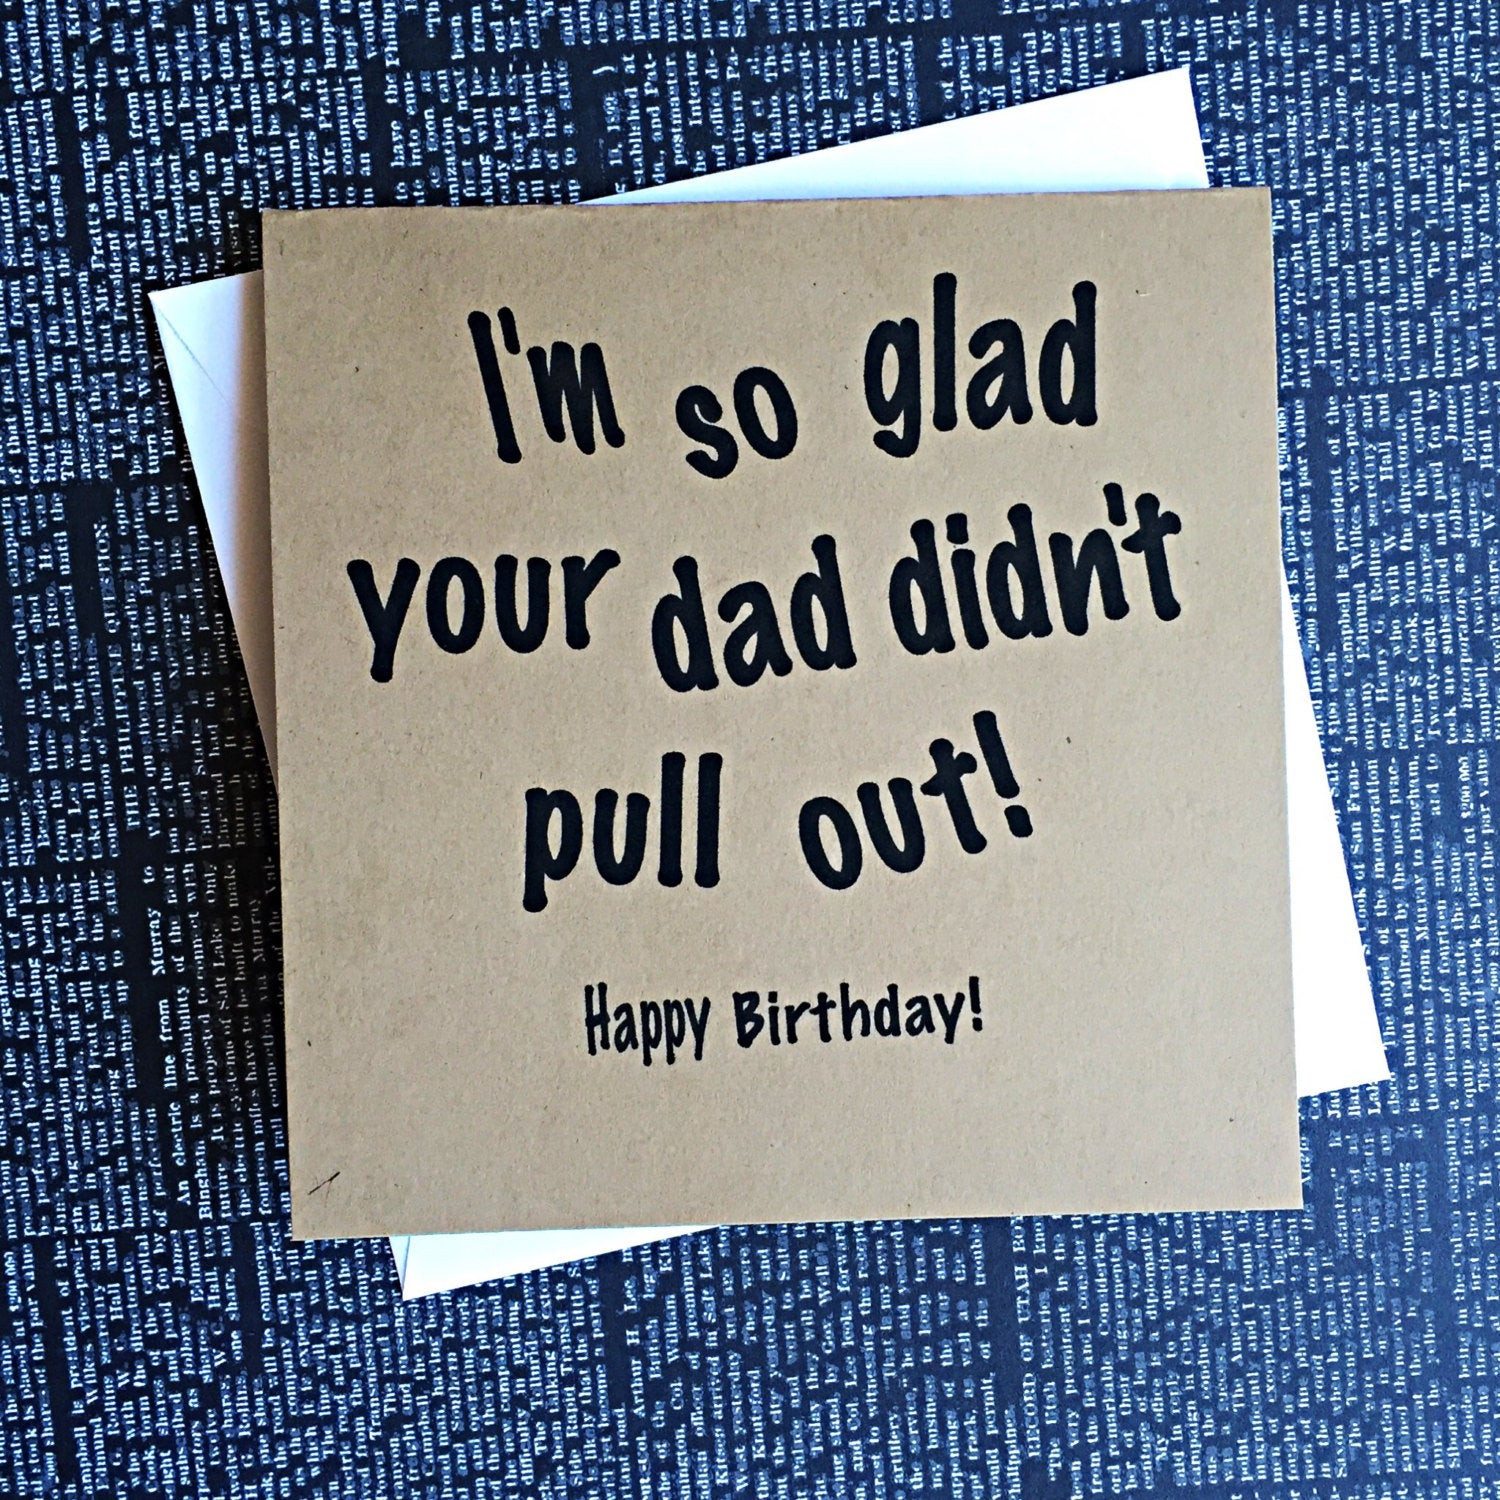 Funny Inappropriate Birthday Cards
 Funny Naughty Birthday Pull Out Card inappropriate card